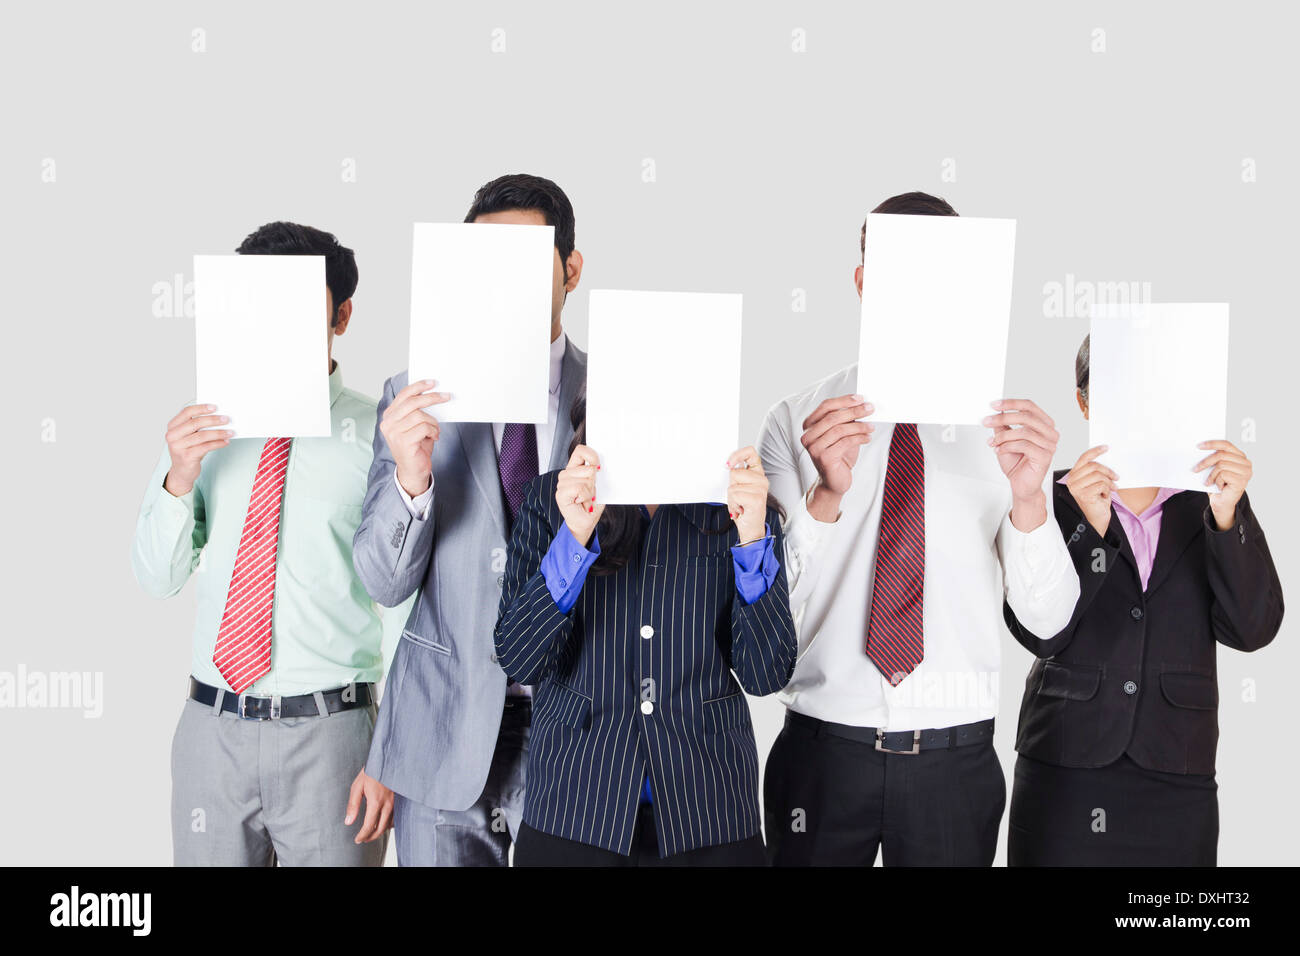 Indian Business People Standing and Obscured Face Stock Photo